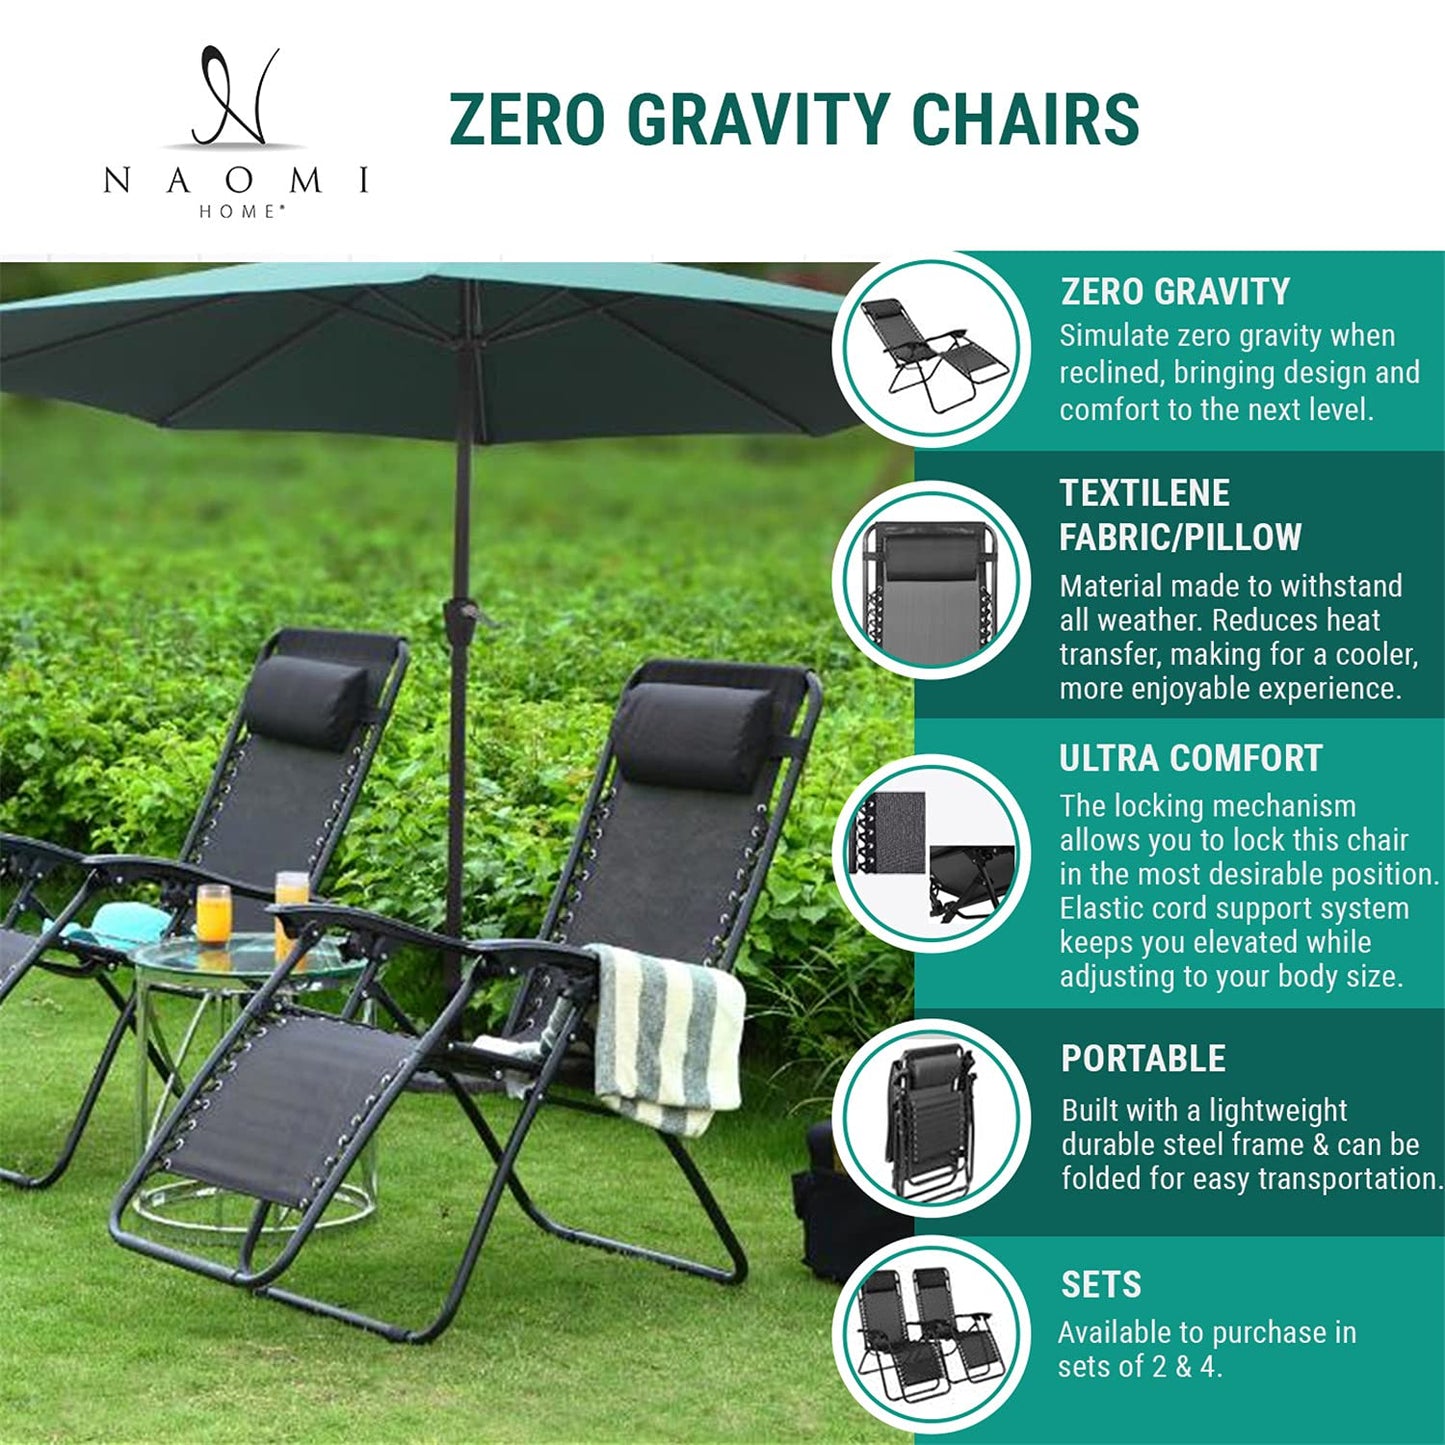 Zero Gravity Chairs Set of 2 Pool Lounge Chair Zero Gravity Recliner Zero Gravity Lounge Chair Antigravity Chairs Anti Gravity Chair Folding Reclining Camping Chair with Headrest by Naomi Home - Cream Modern